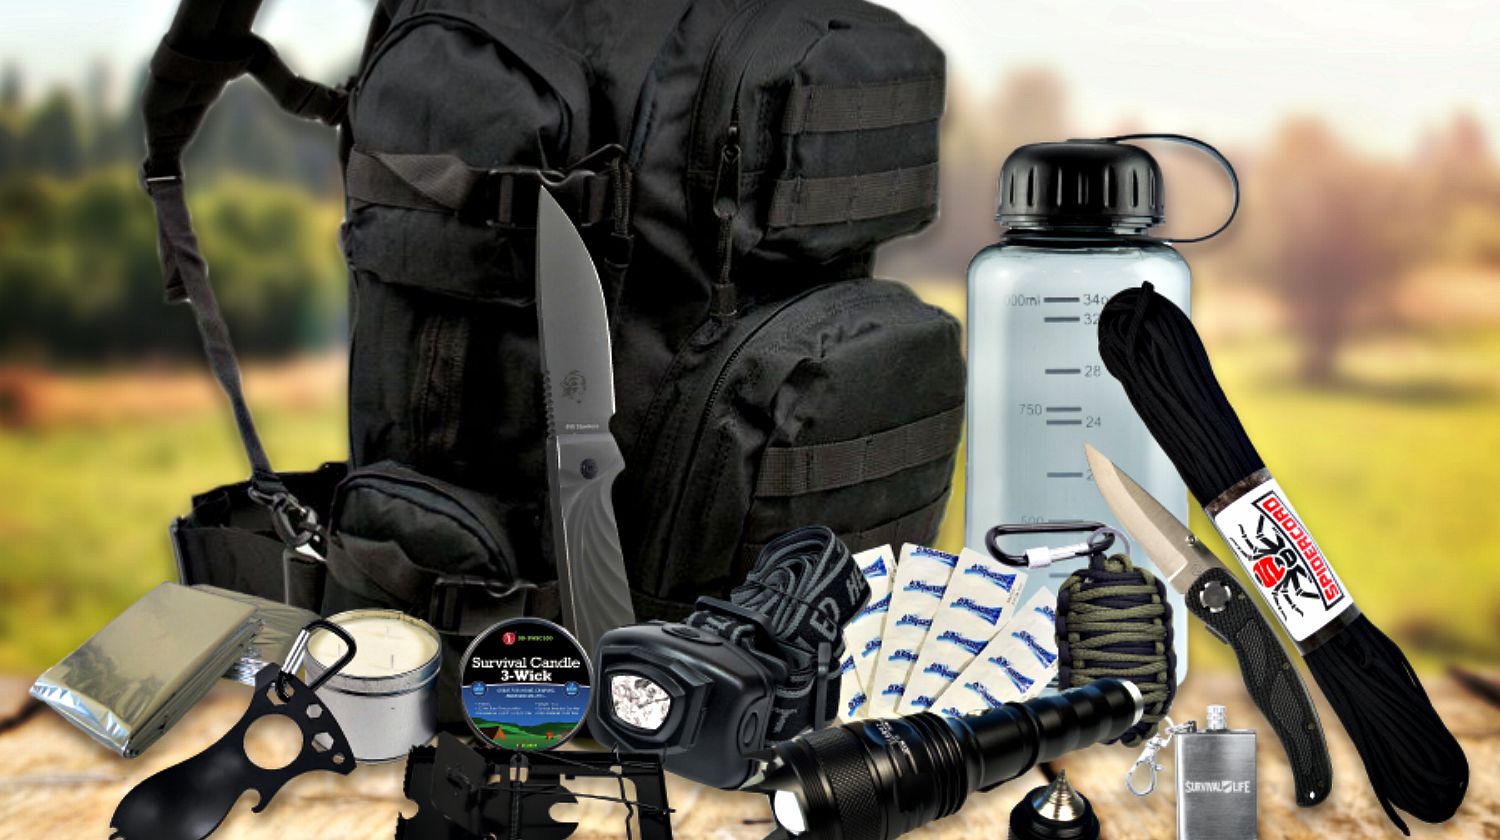 The Ultimate Bug Out Bag List For Every Survivalist